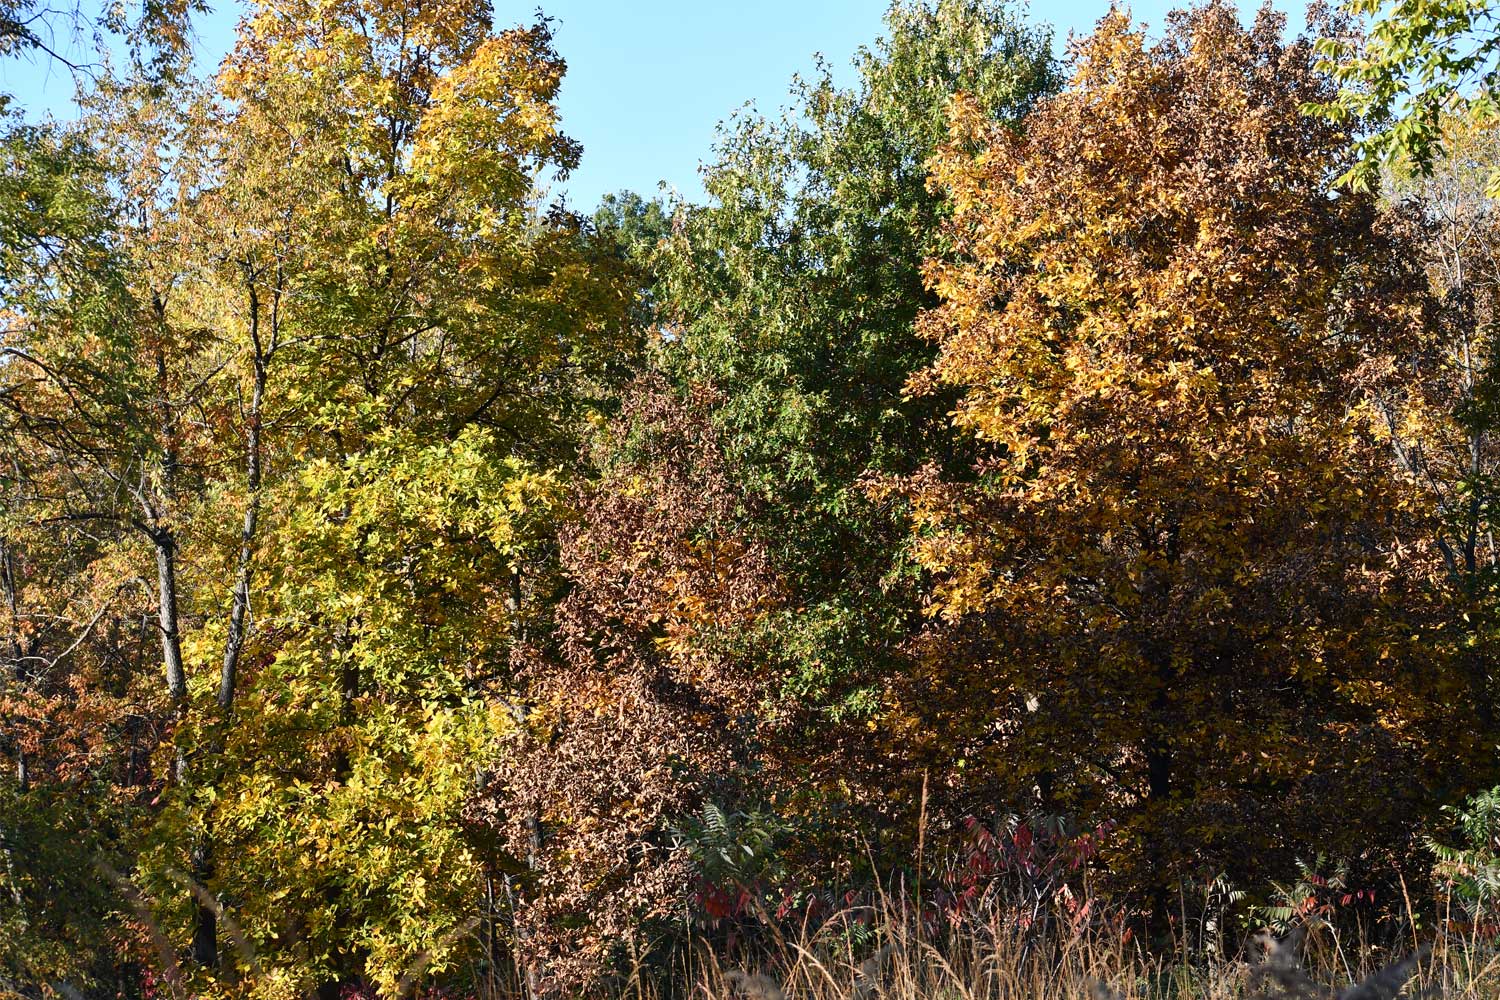 Trees with leaves displaying fall colors.